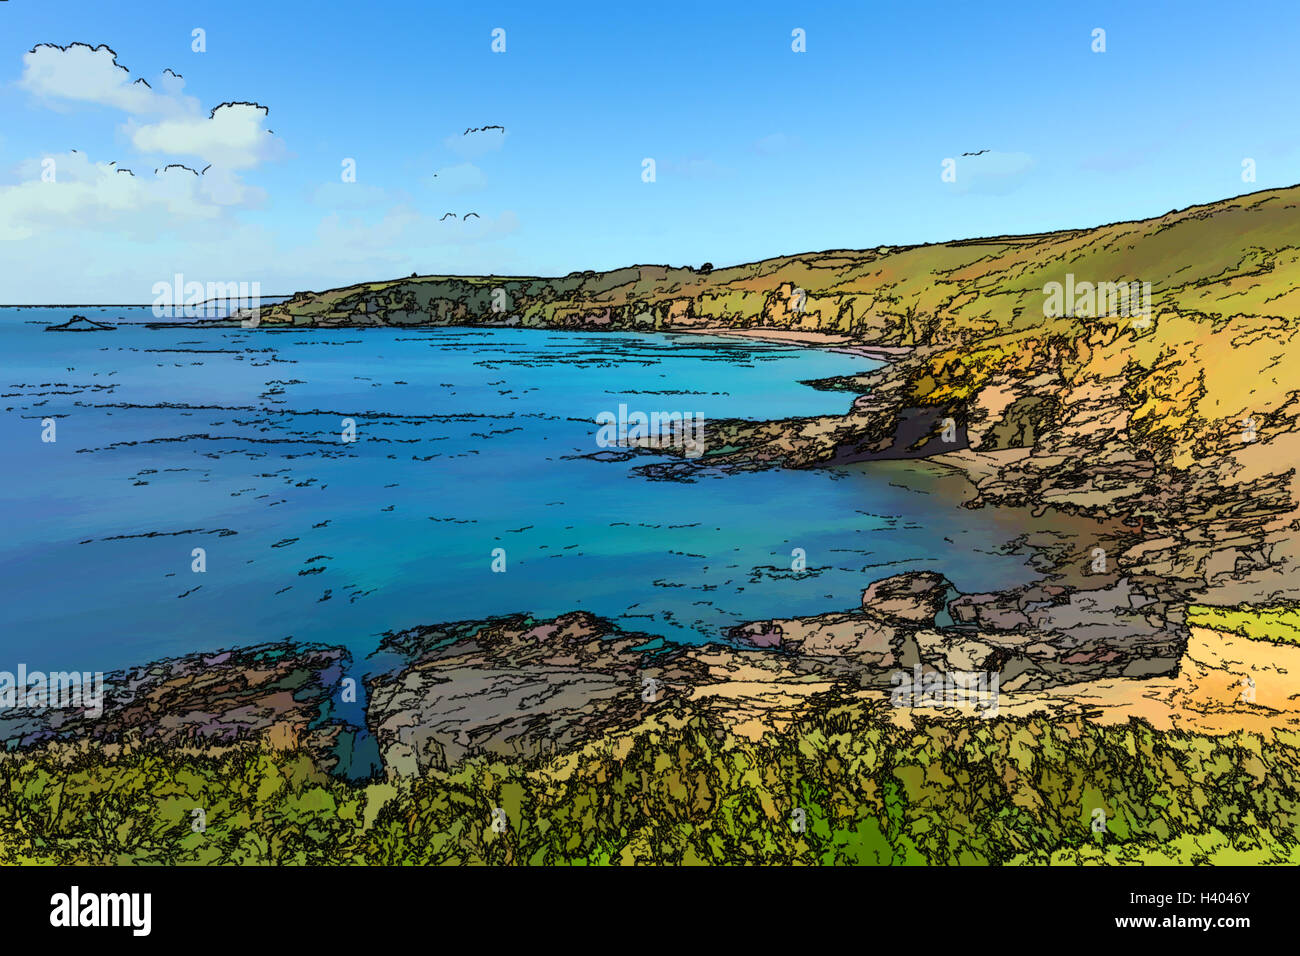 Kenneggy Sand Cornwall England west of Praa Sands and Penzance with blue sky and sea colourful illustration like cartoon effect Stock Photo